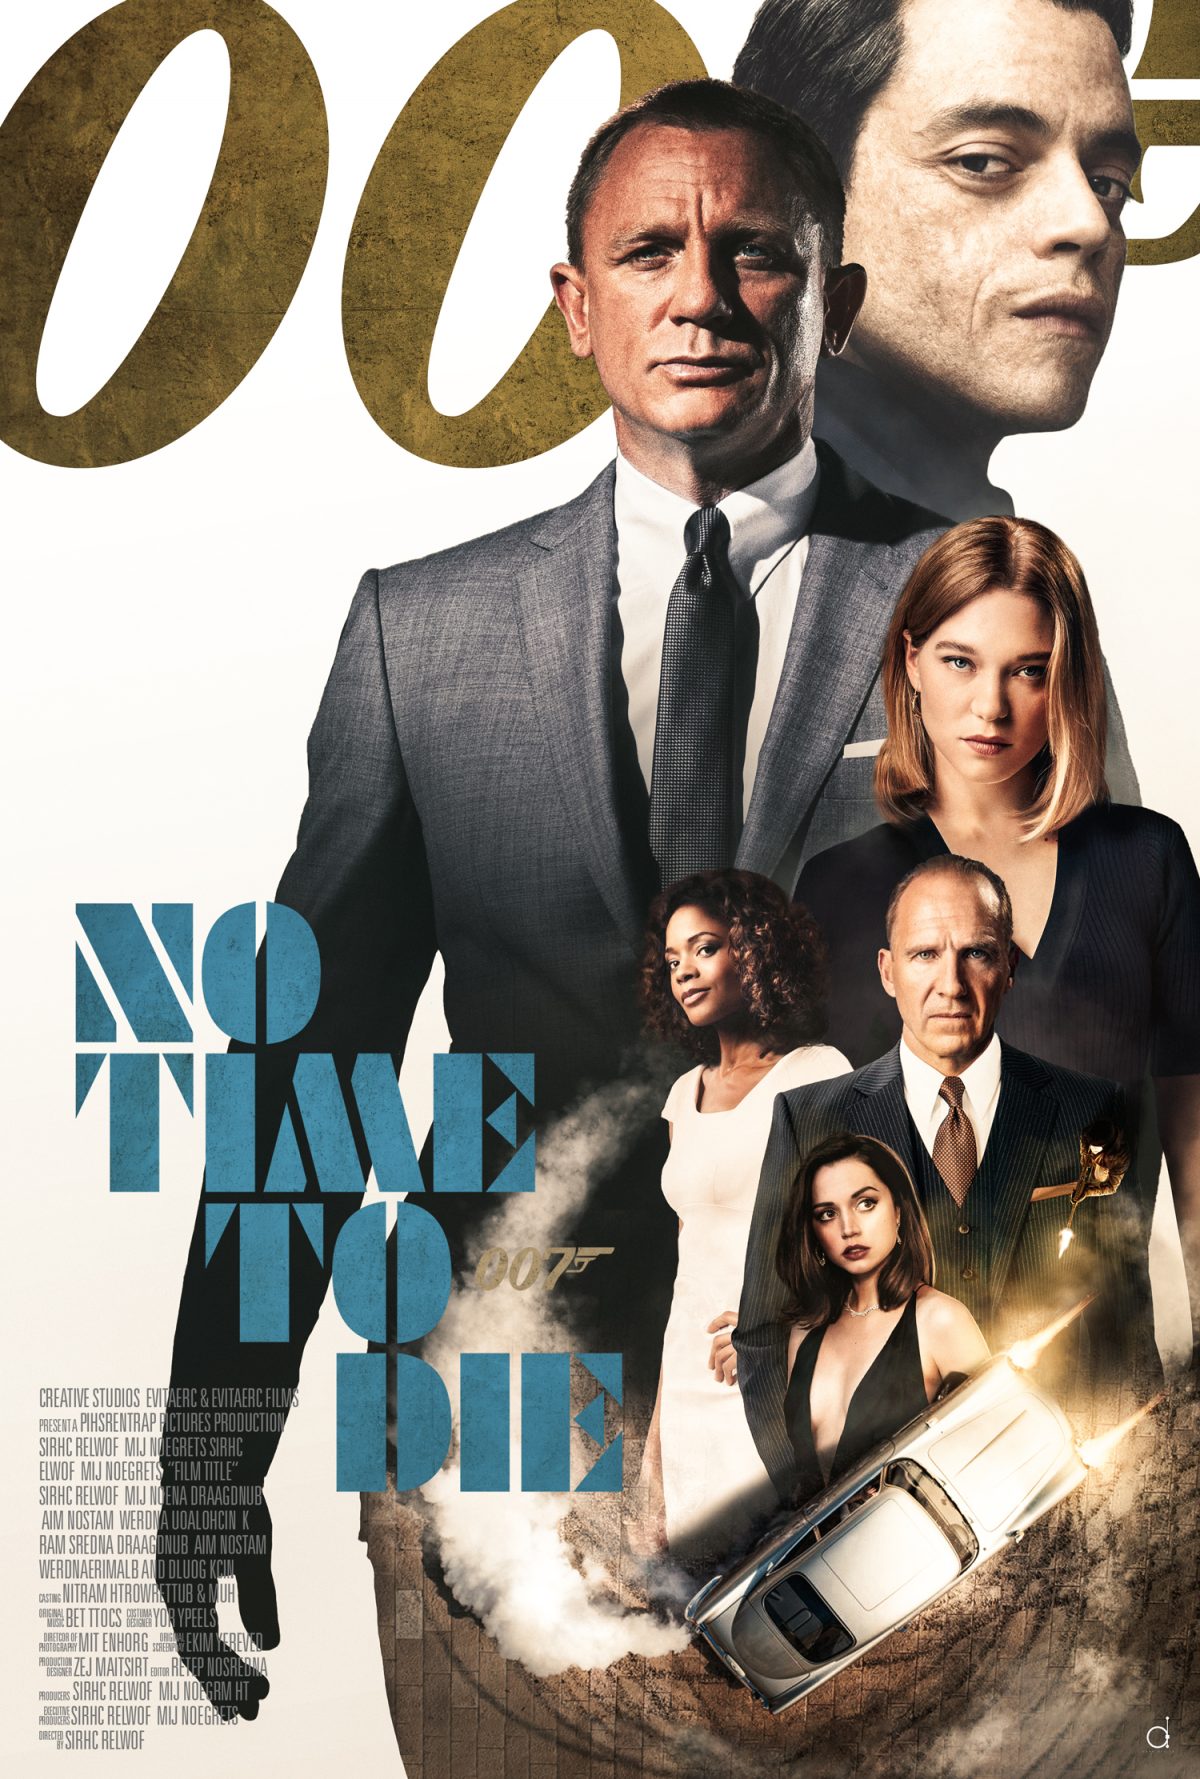 Nonton No Time To Die / James Bond: No Time To Die | By SneakyArts - Where To Watch No Time To Die James Bond